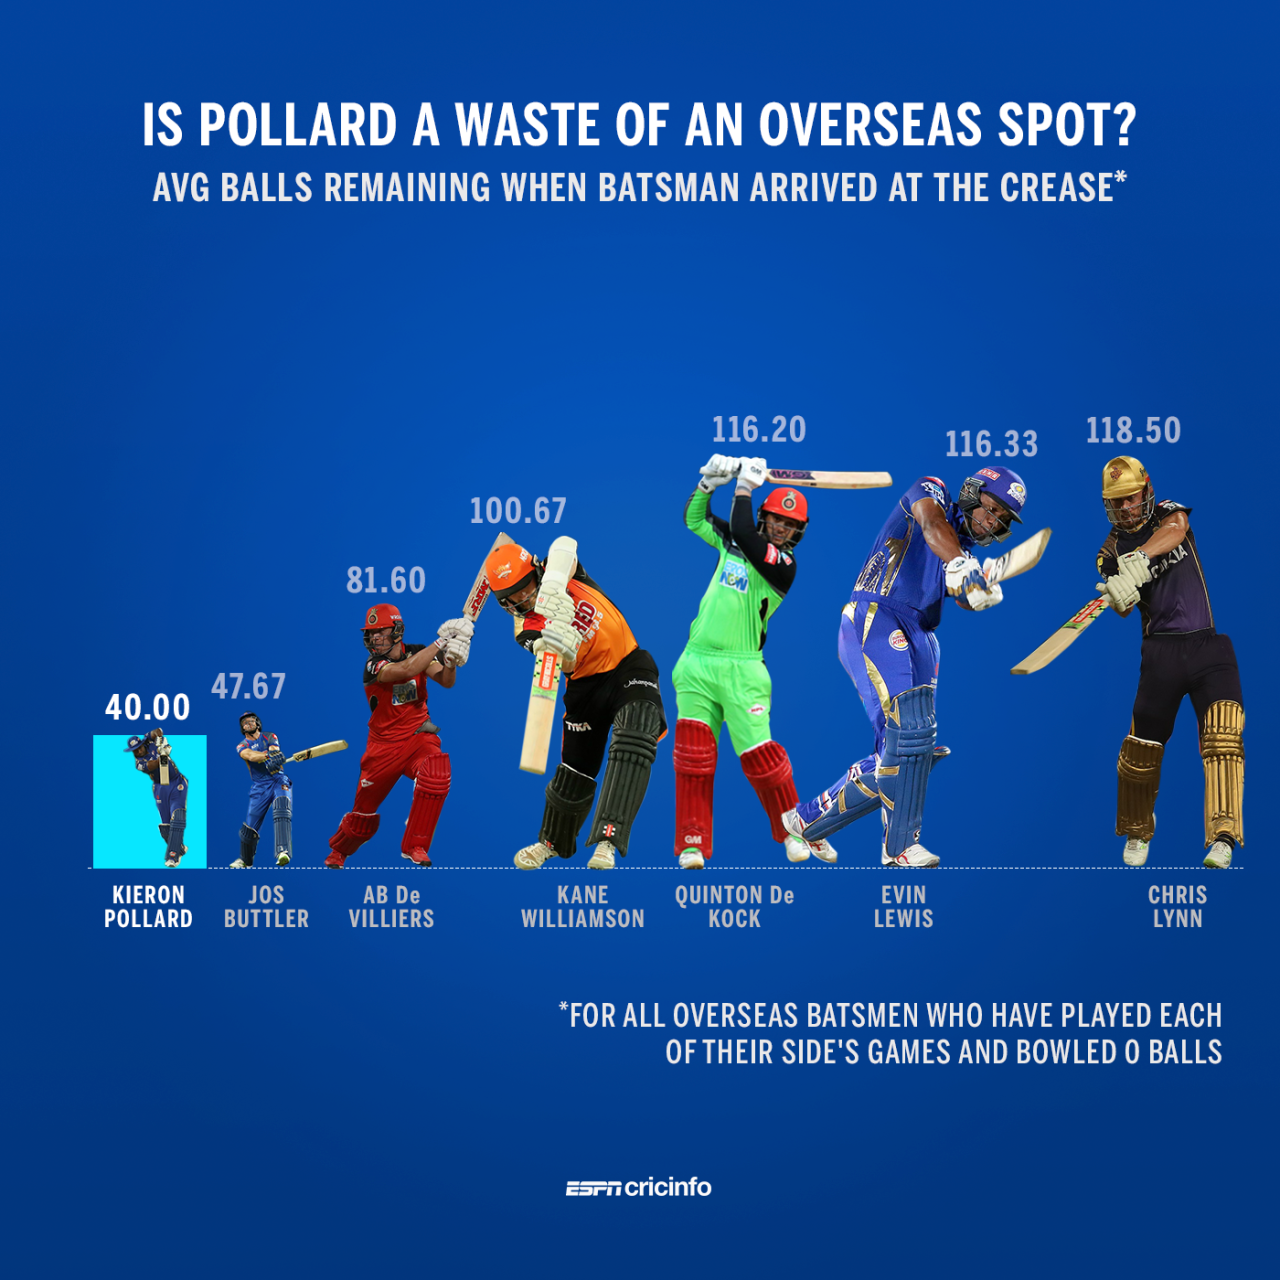 Kieron Pollard is playing as a specialist batsman but barely getting any time at the crease for Mumbai Indians